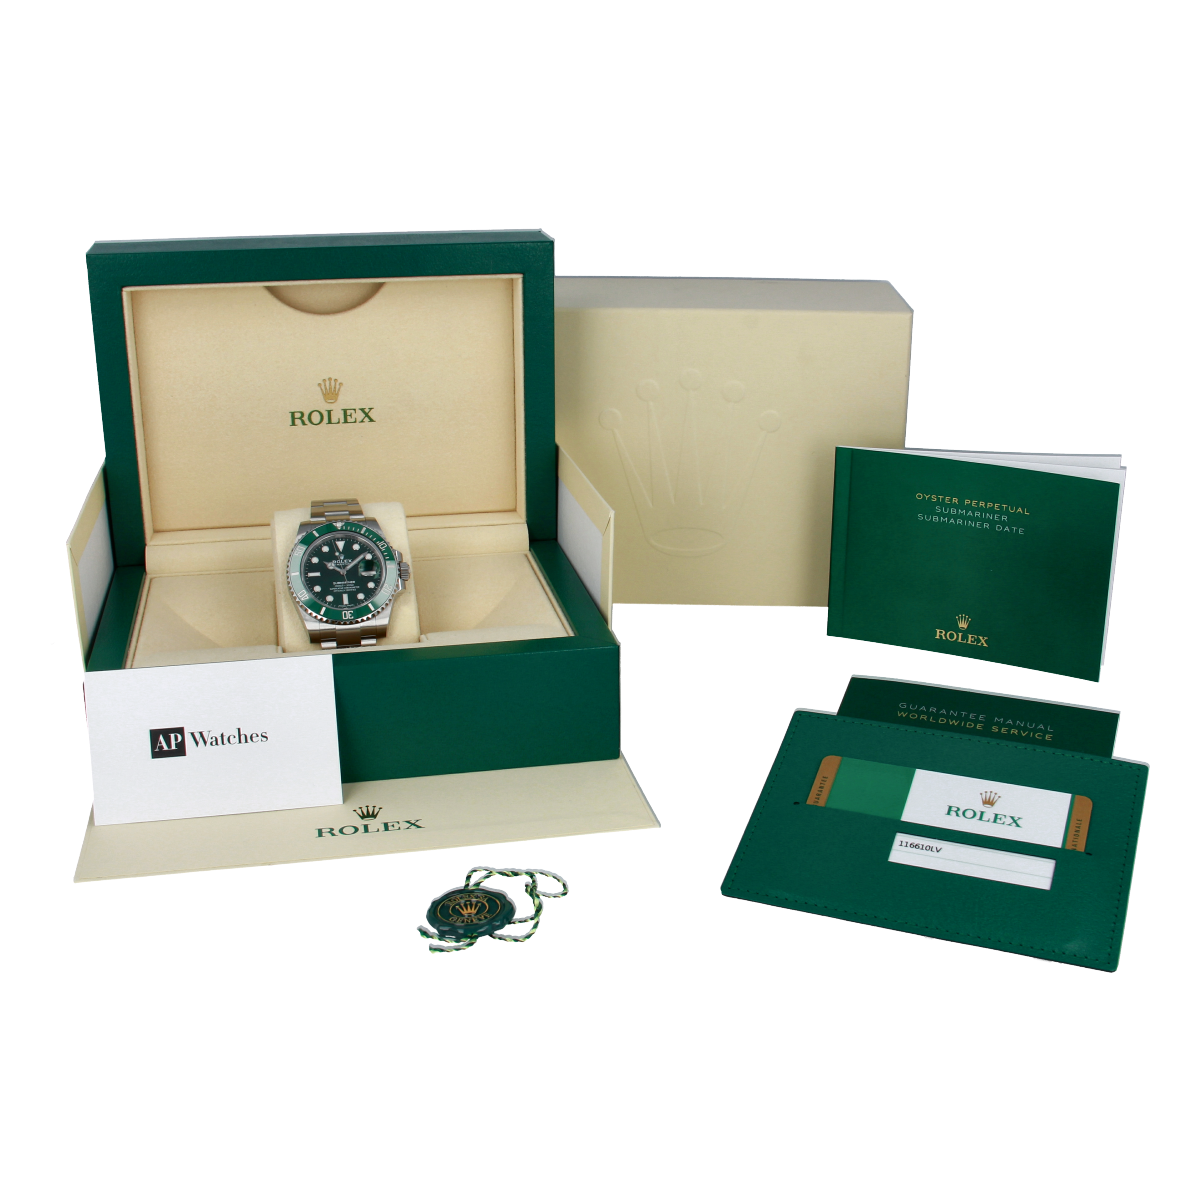 Rolex Submariner Date 'Hulk' - Boxed with Papers from December